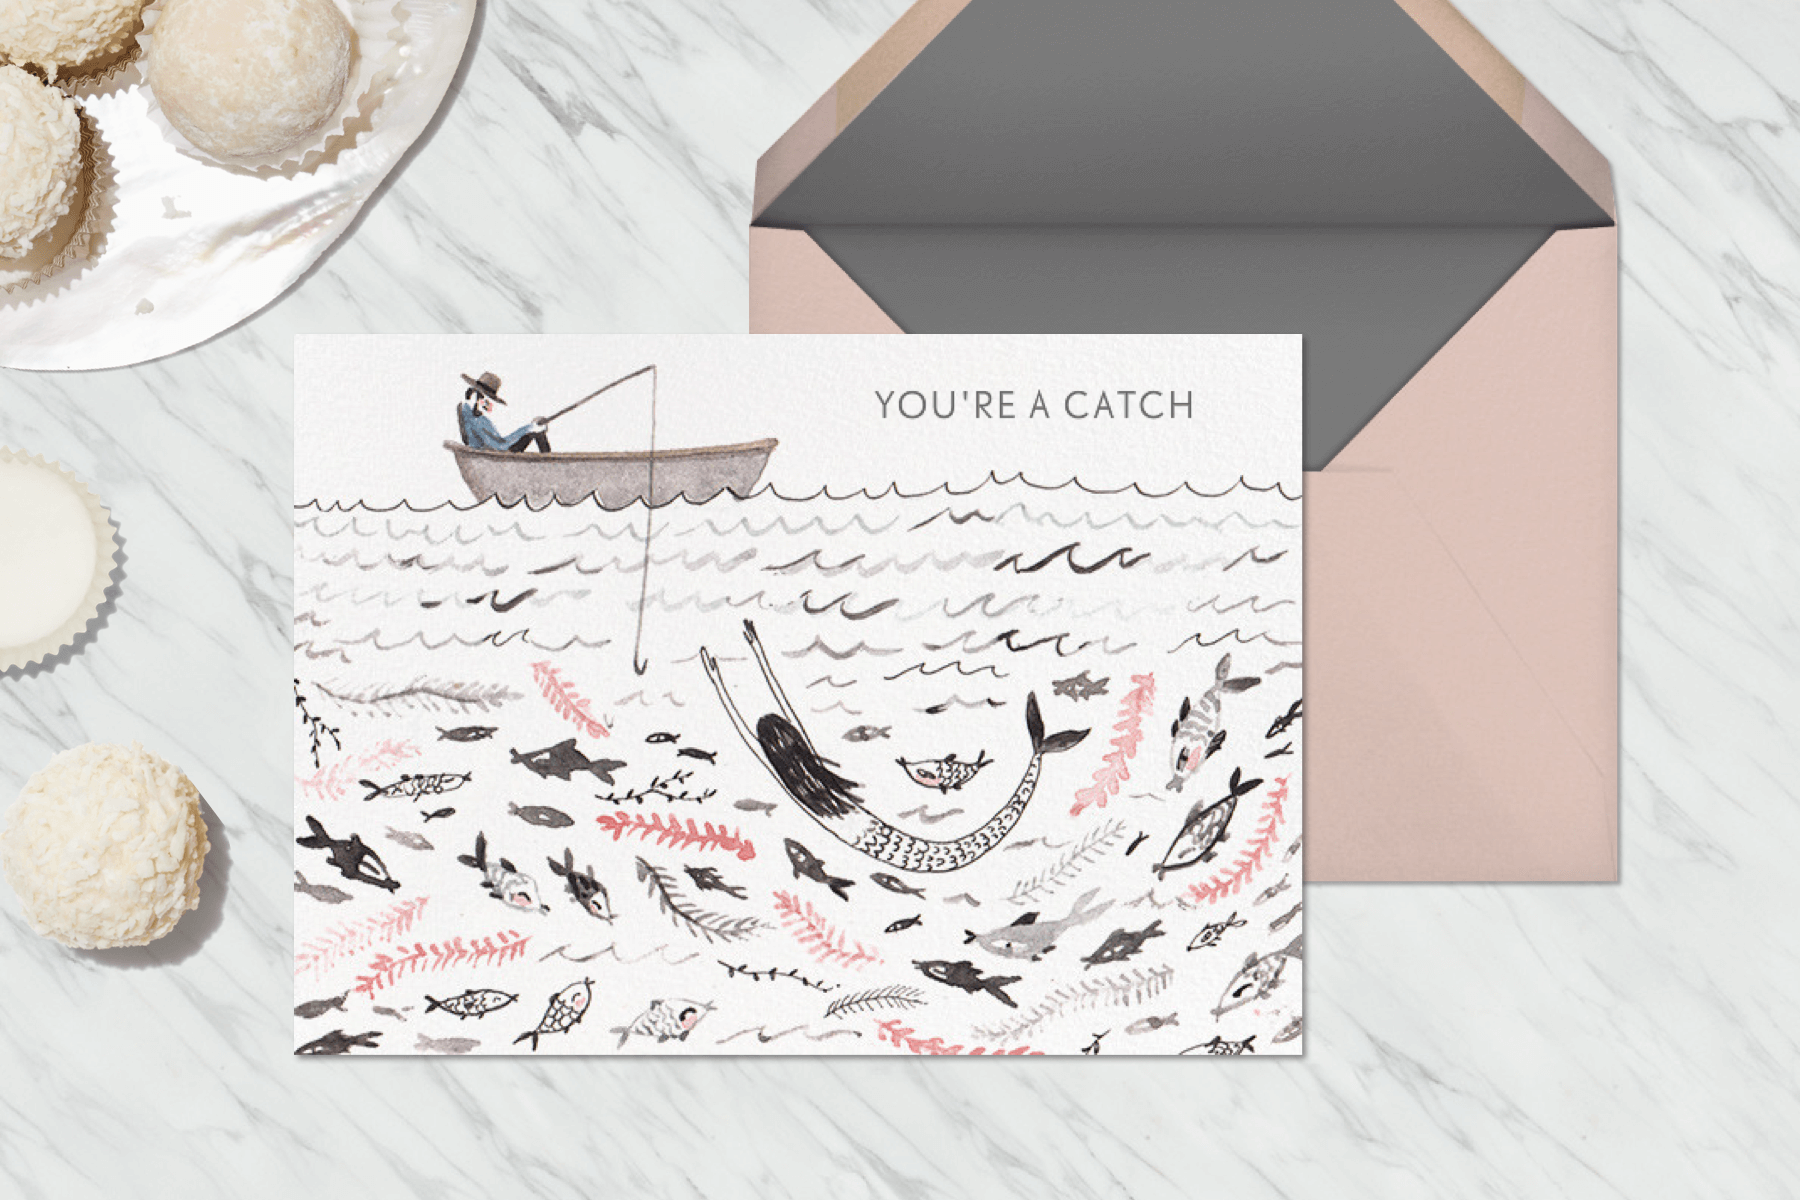 A Valentine’s Day card with an illustration of a fisherman catching a mermaid.